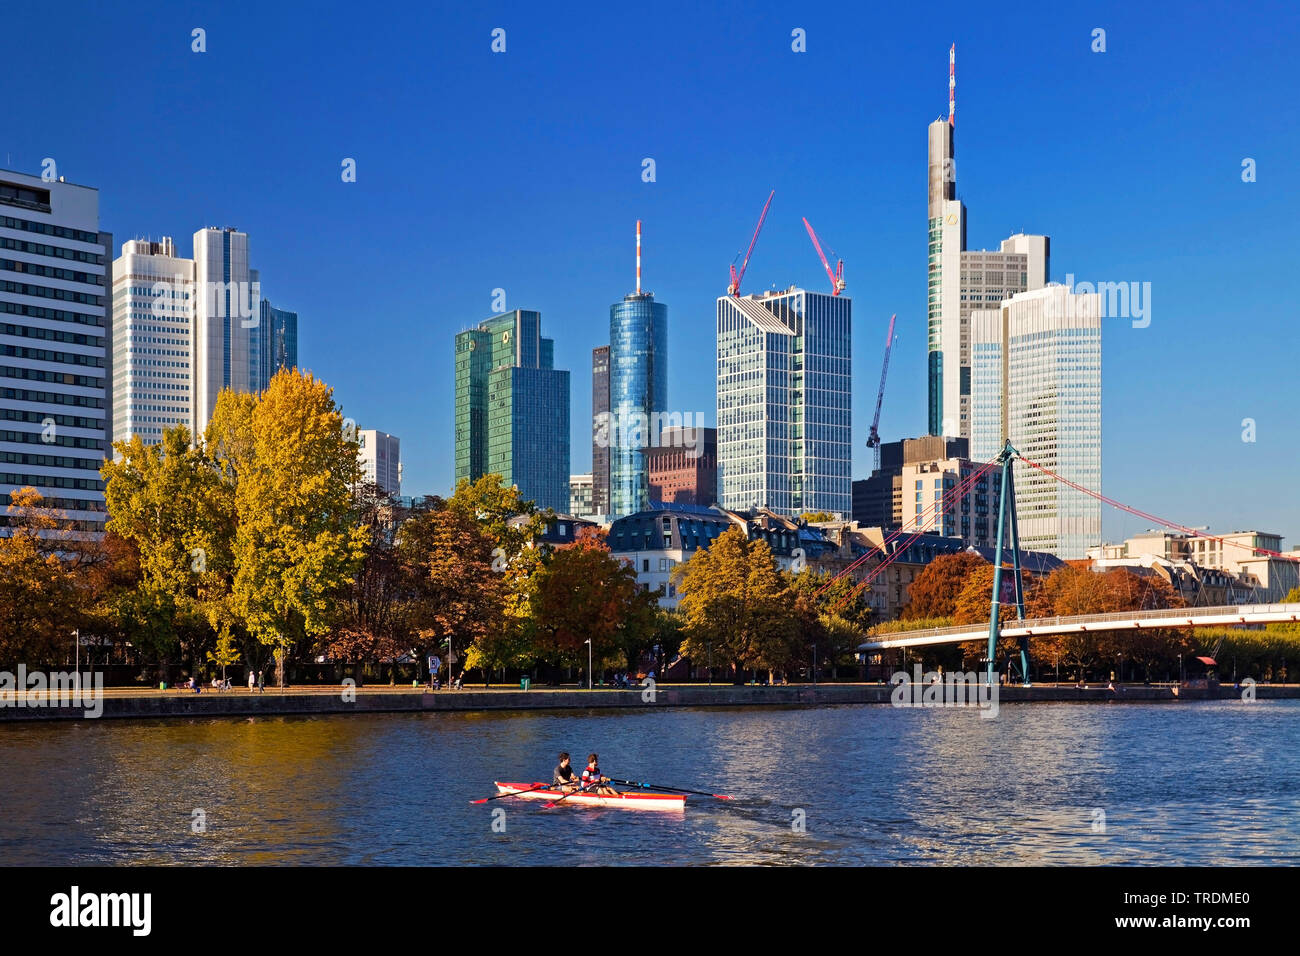 rowboat on the Main, tower blocks of the financial district in background, Germany, Hesse, Frankfurt am Main Stock Photo